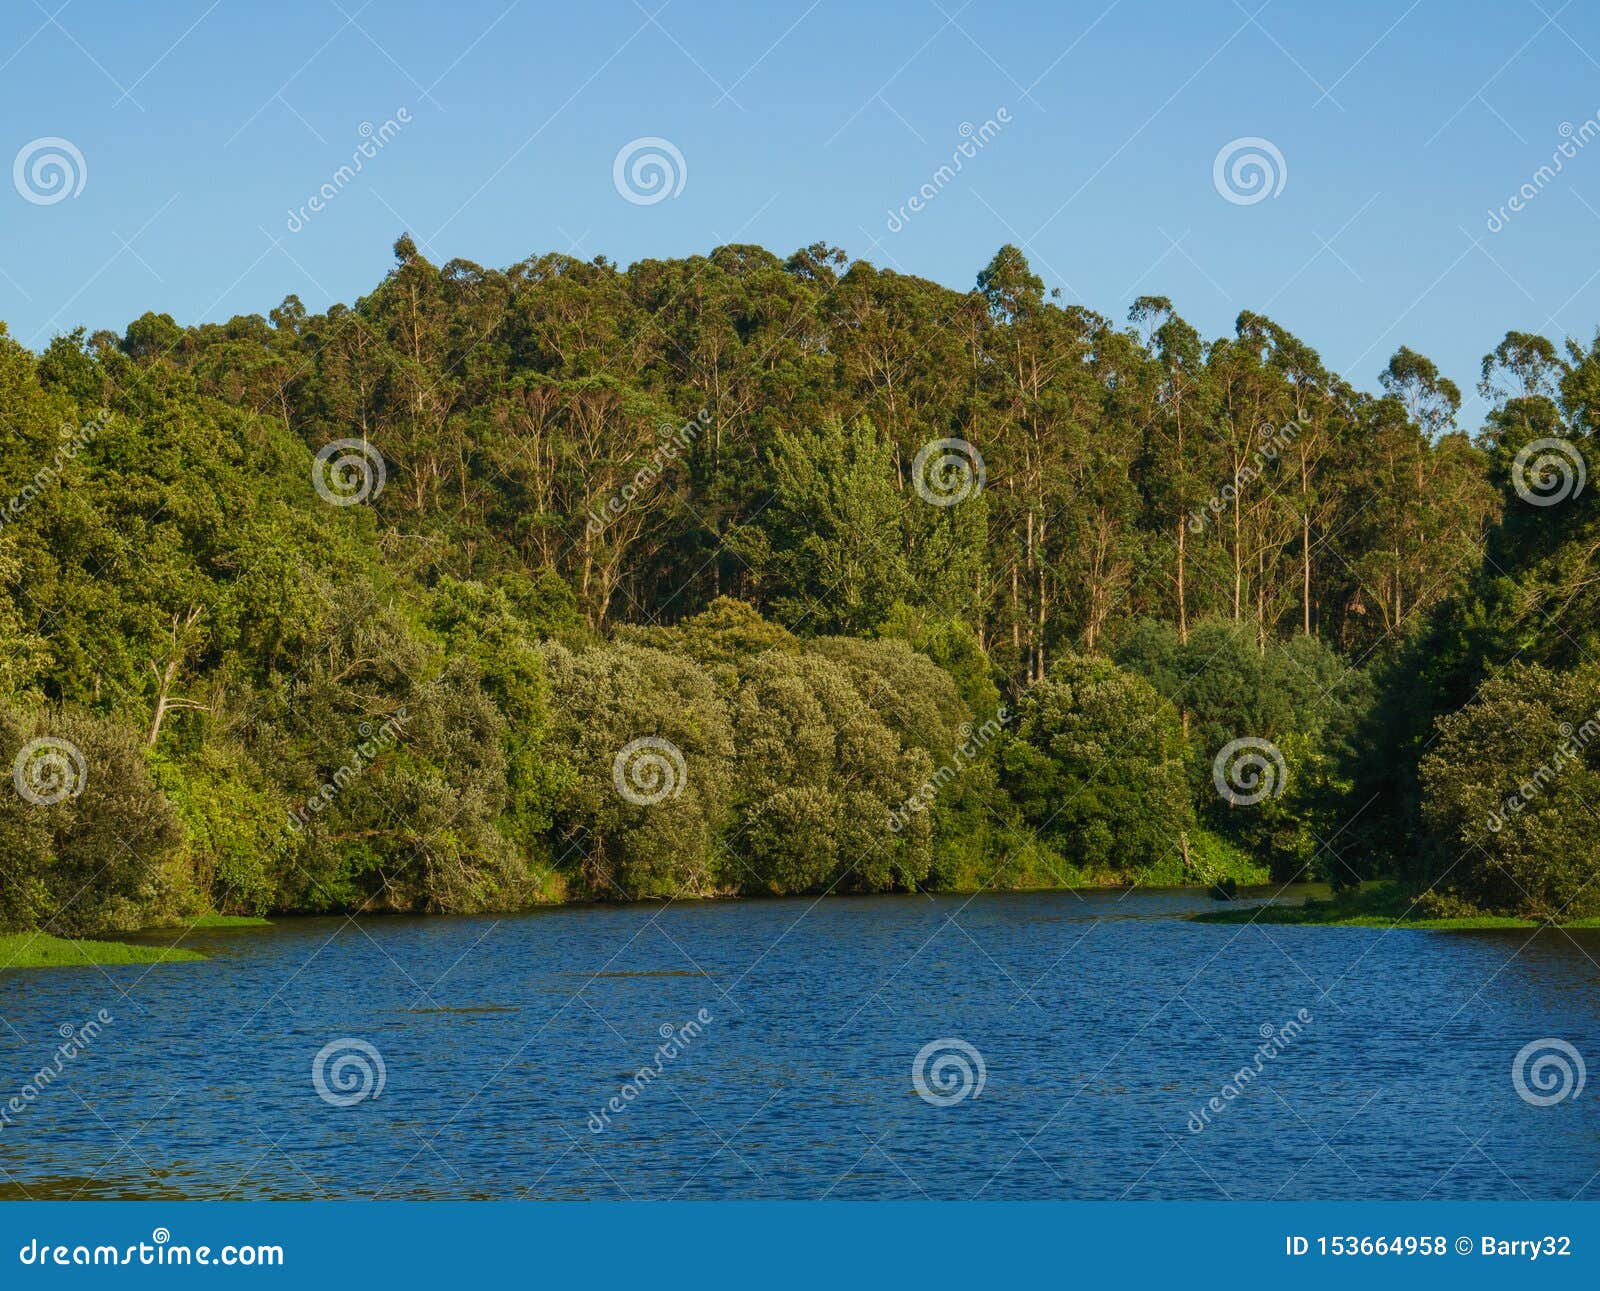 Forest on Banks of Ave River in Portugal on a Sunny Summer Day with Blue  Sky Stock Photo - Image of trees, eucalyptus: 153664958